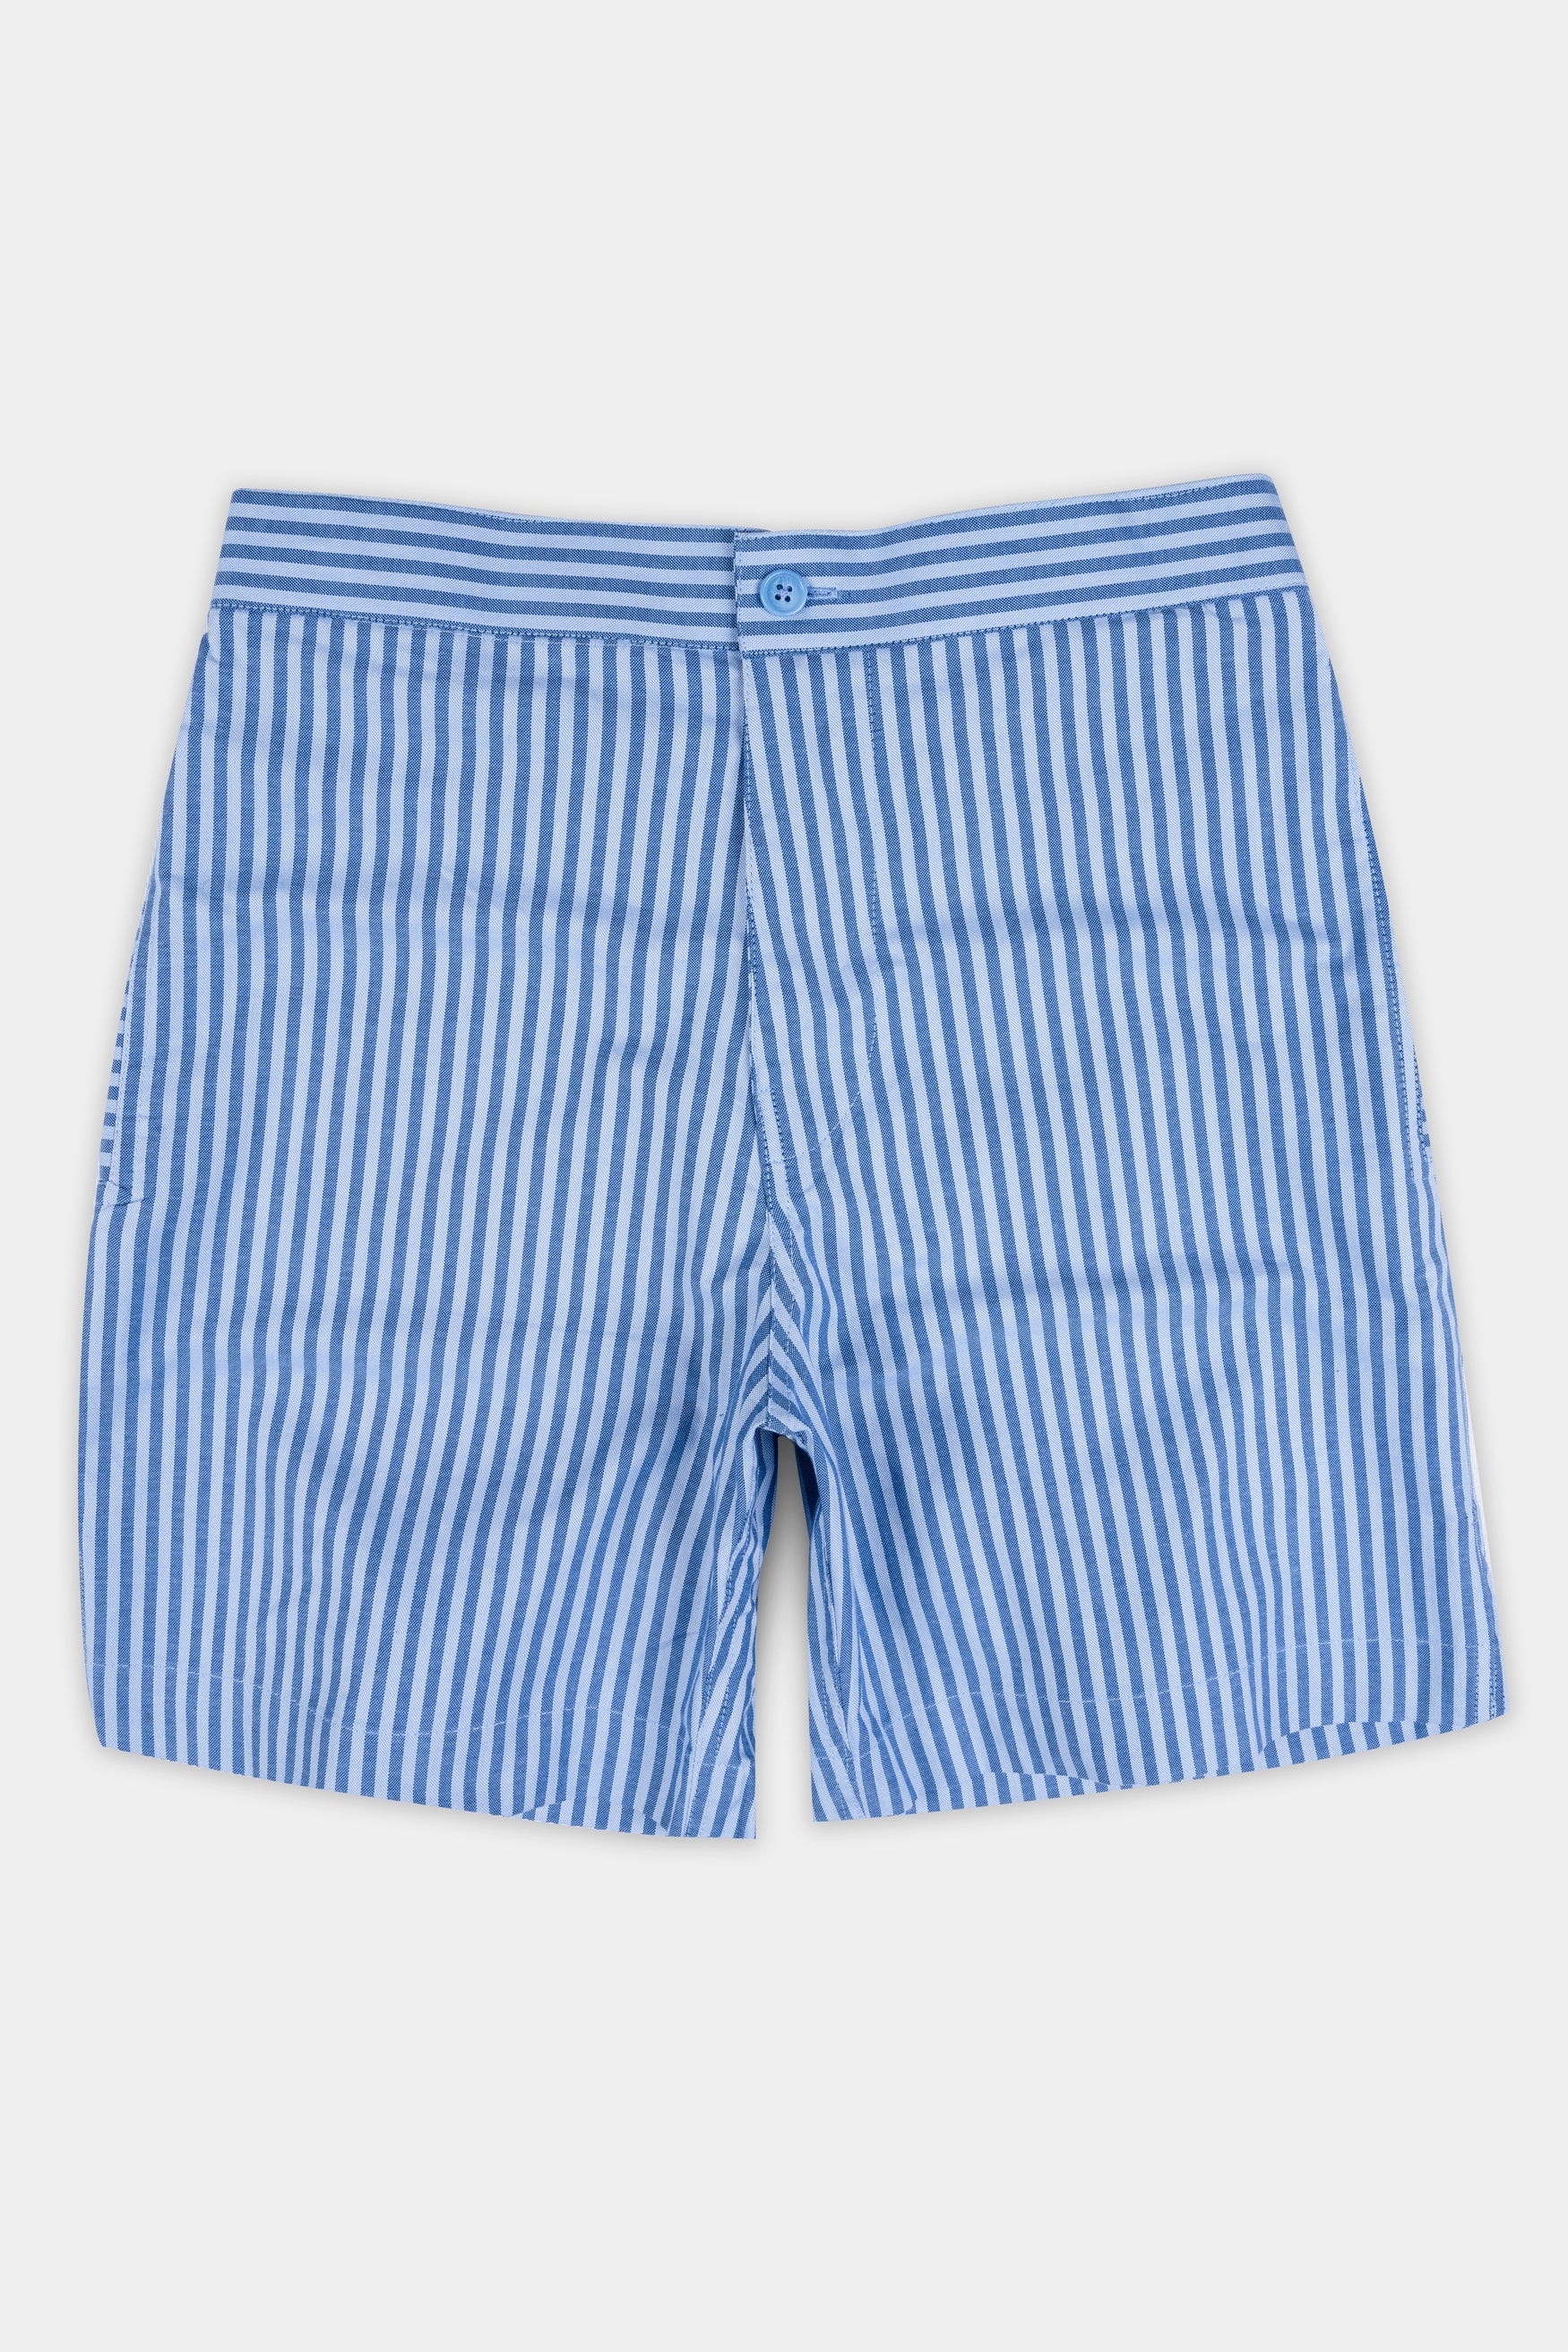 Azure and Perano Blue Striped Royal Oxford Shorts SR387-28, SR387-30, SR387-32, SR387-34, SR387-36, SR387-38, SR387-40, SR387-42, SR387-44